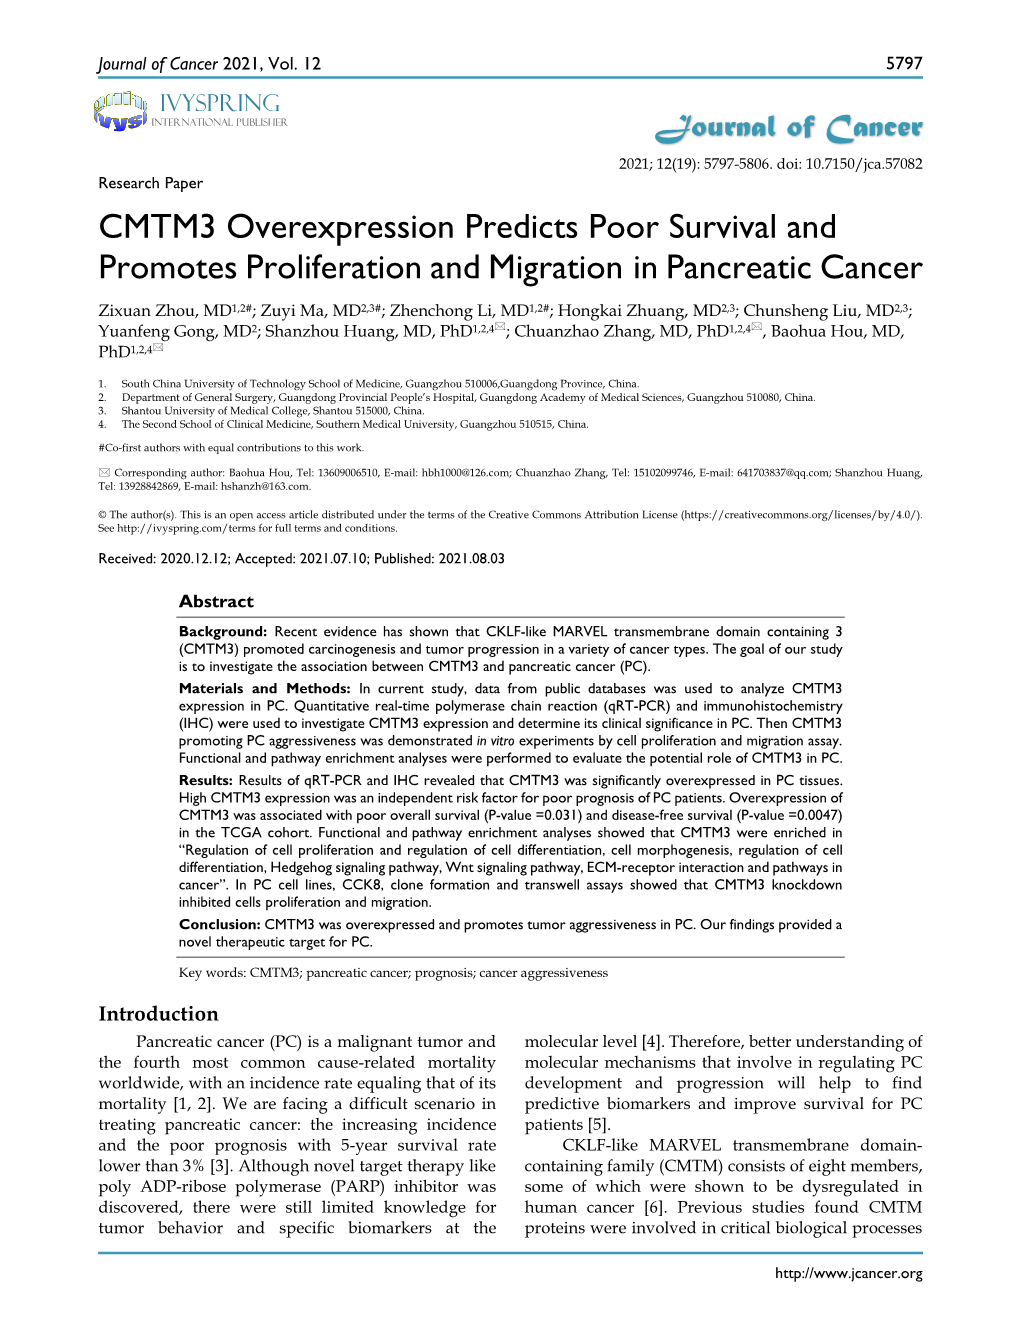 CMTM3 Overexpression Predicts Poor Survival and Promotes